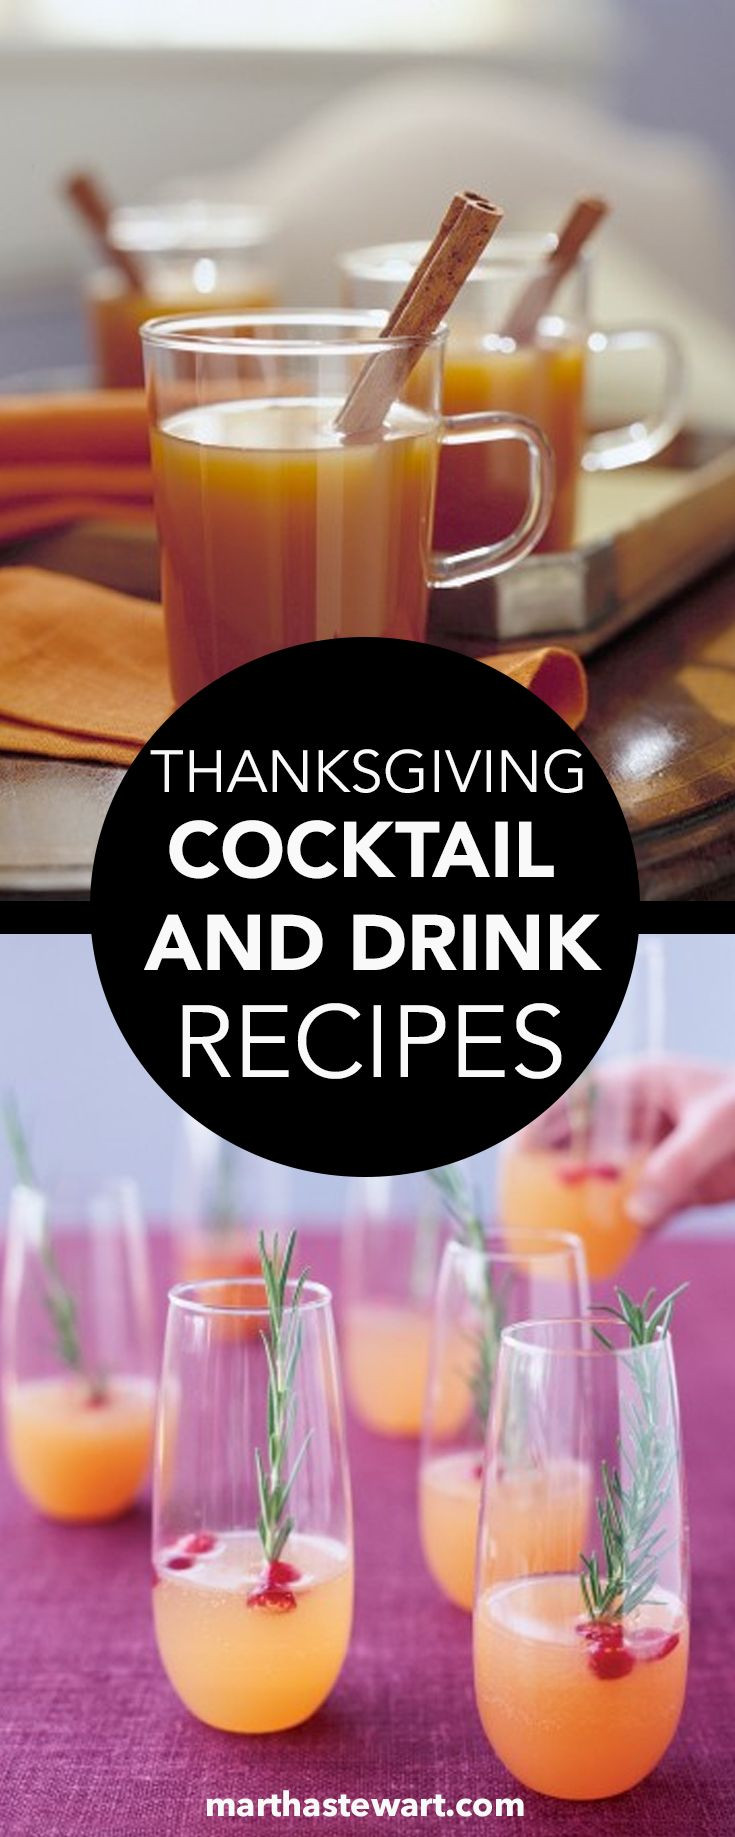 Thanksgiving Drinks Alcoholic
 Thanksgiving Cocktail and Drink Recipes